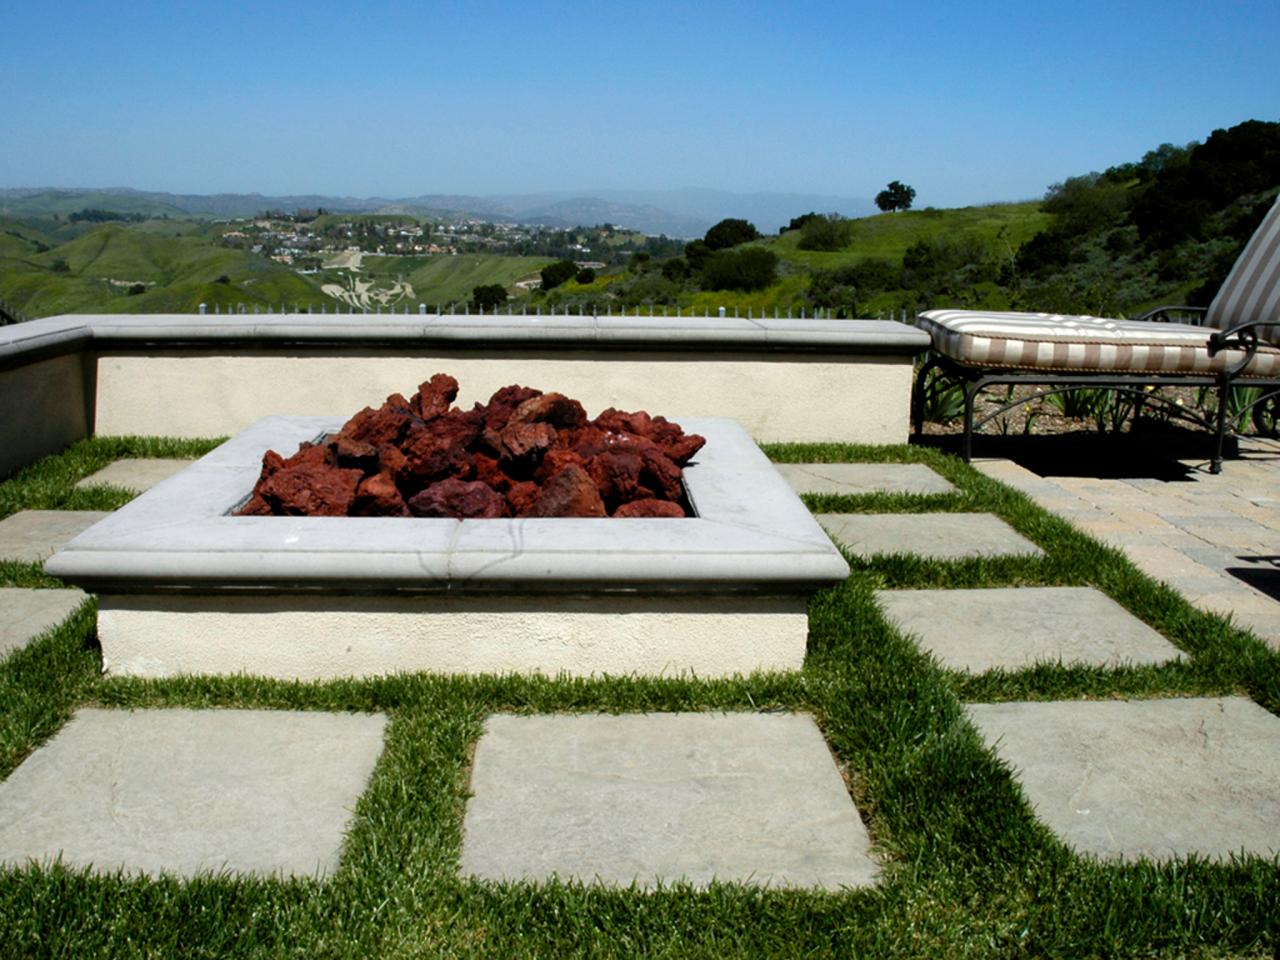 Square And Rectangular Fire Pits, How To Make A Fire Pit With Square Pavers